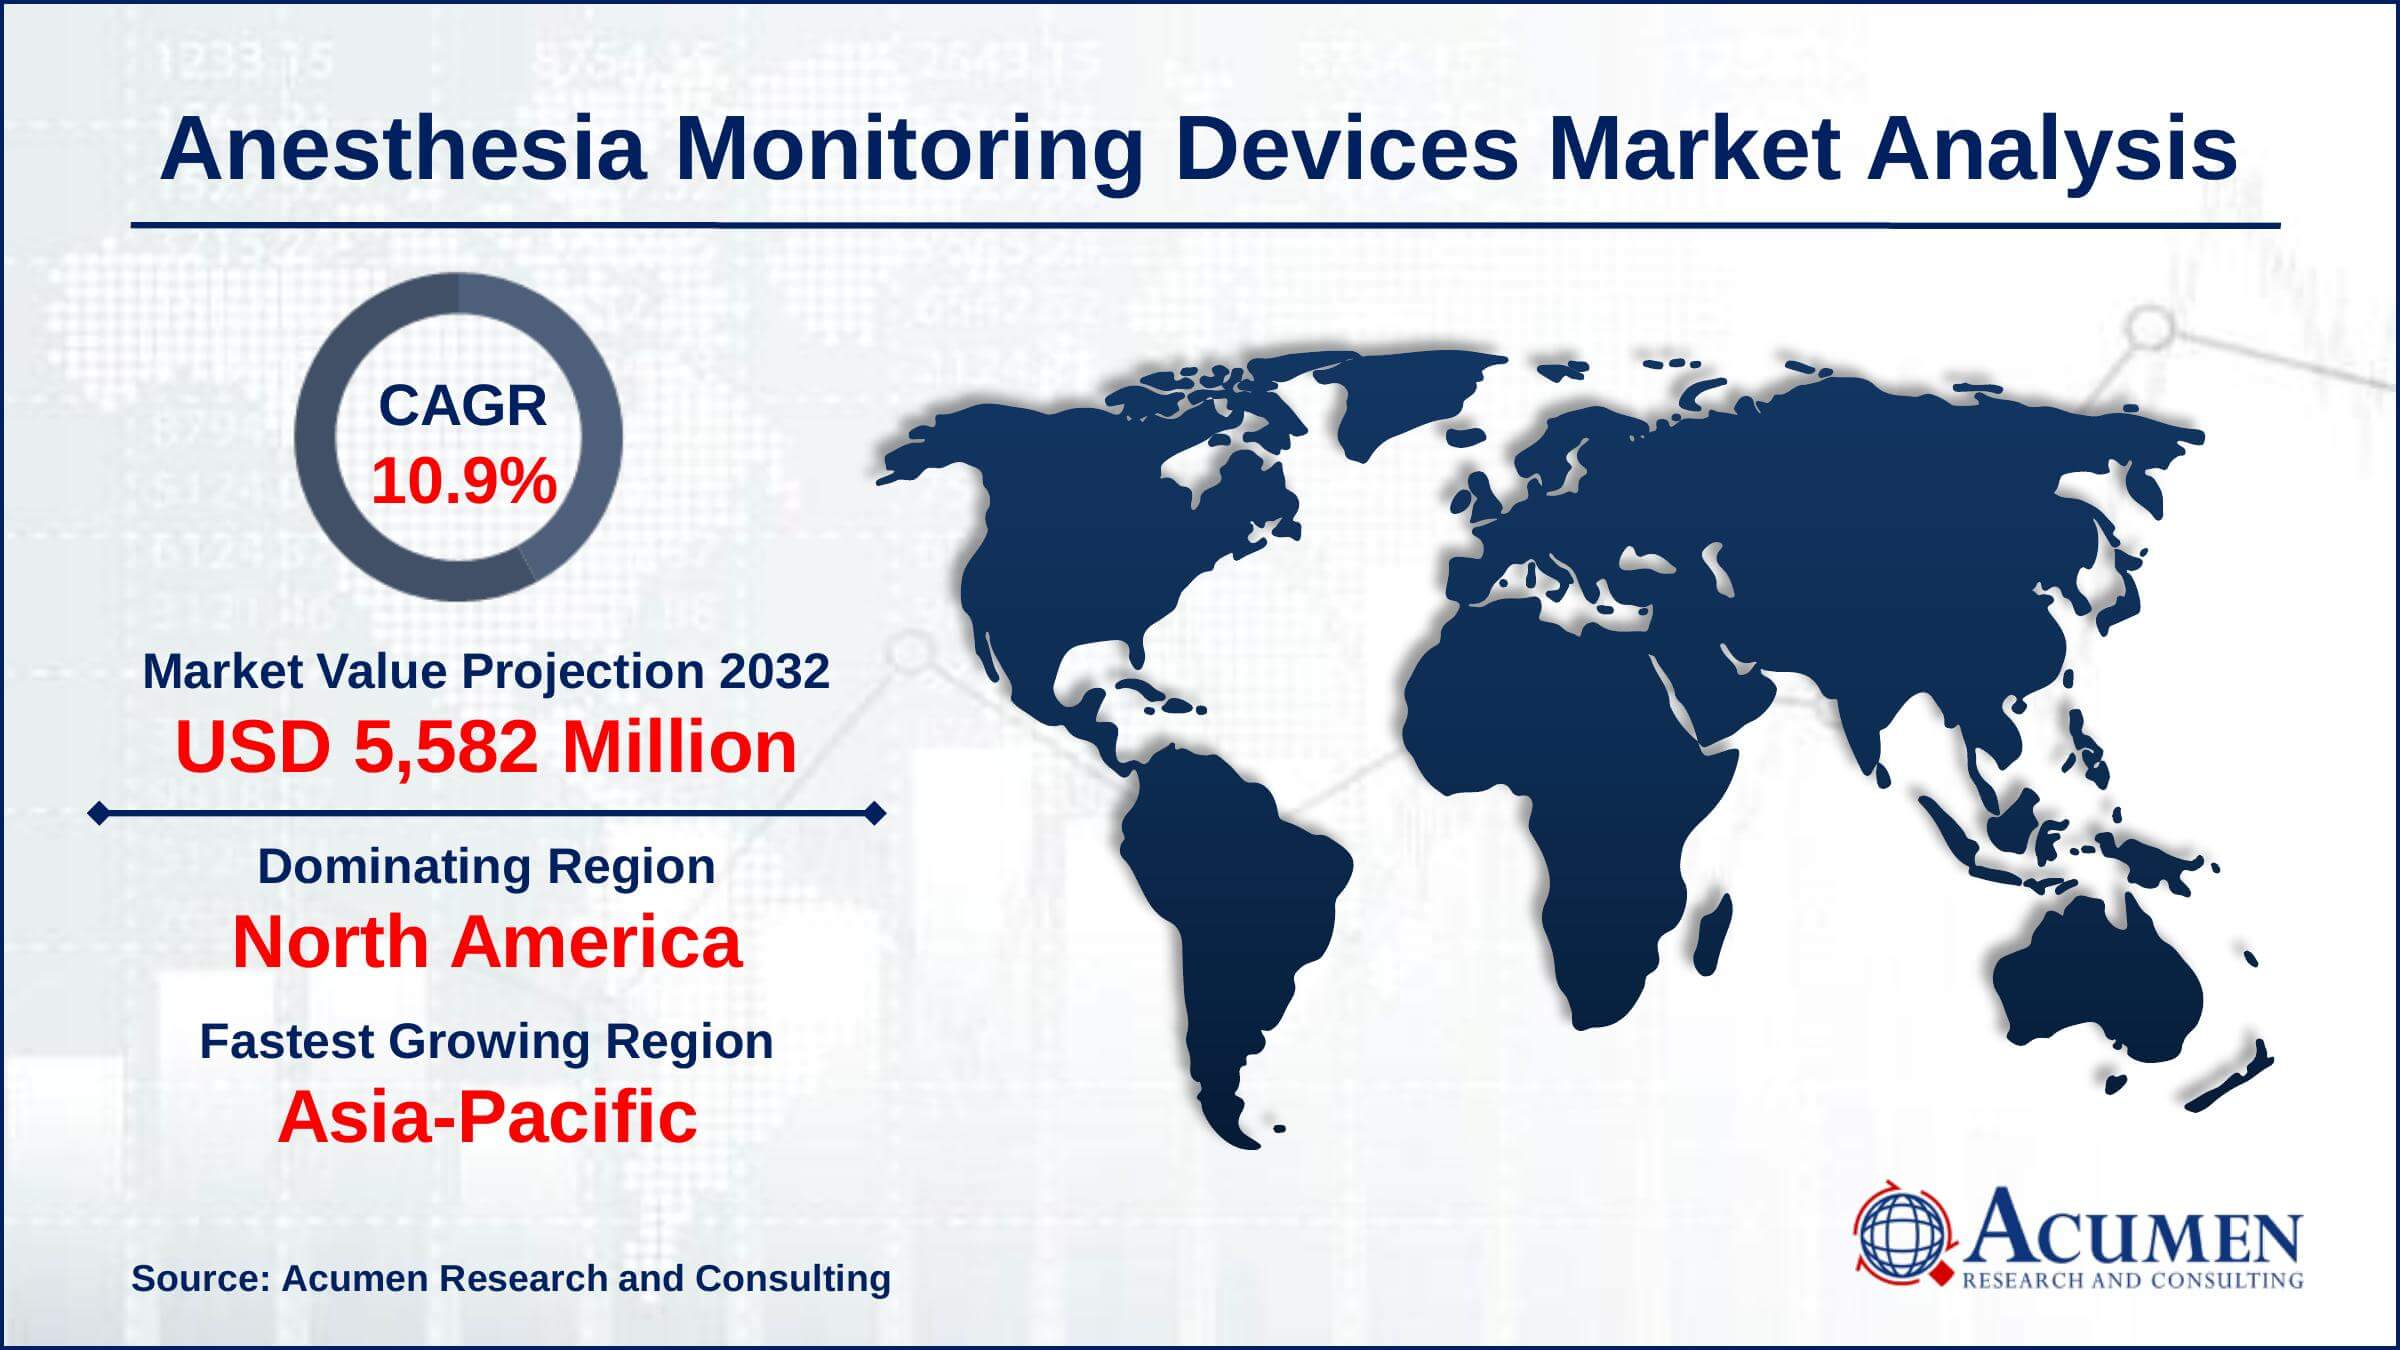 Global Anesthesia Monitoring Devices Market Trends